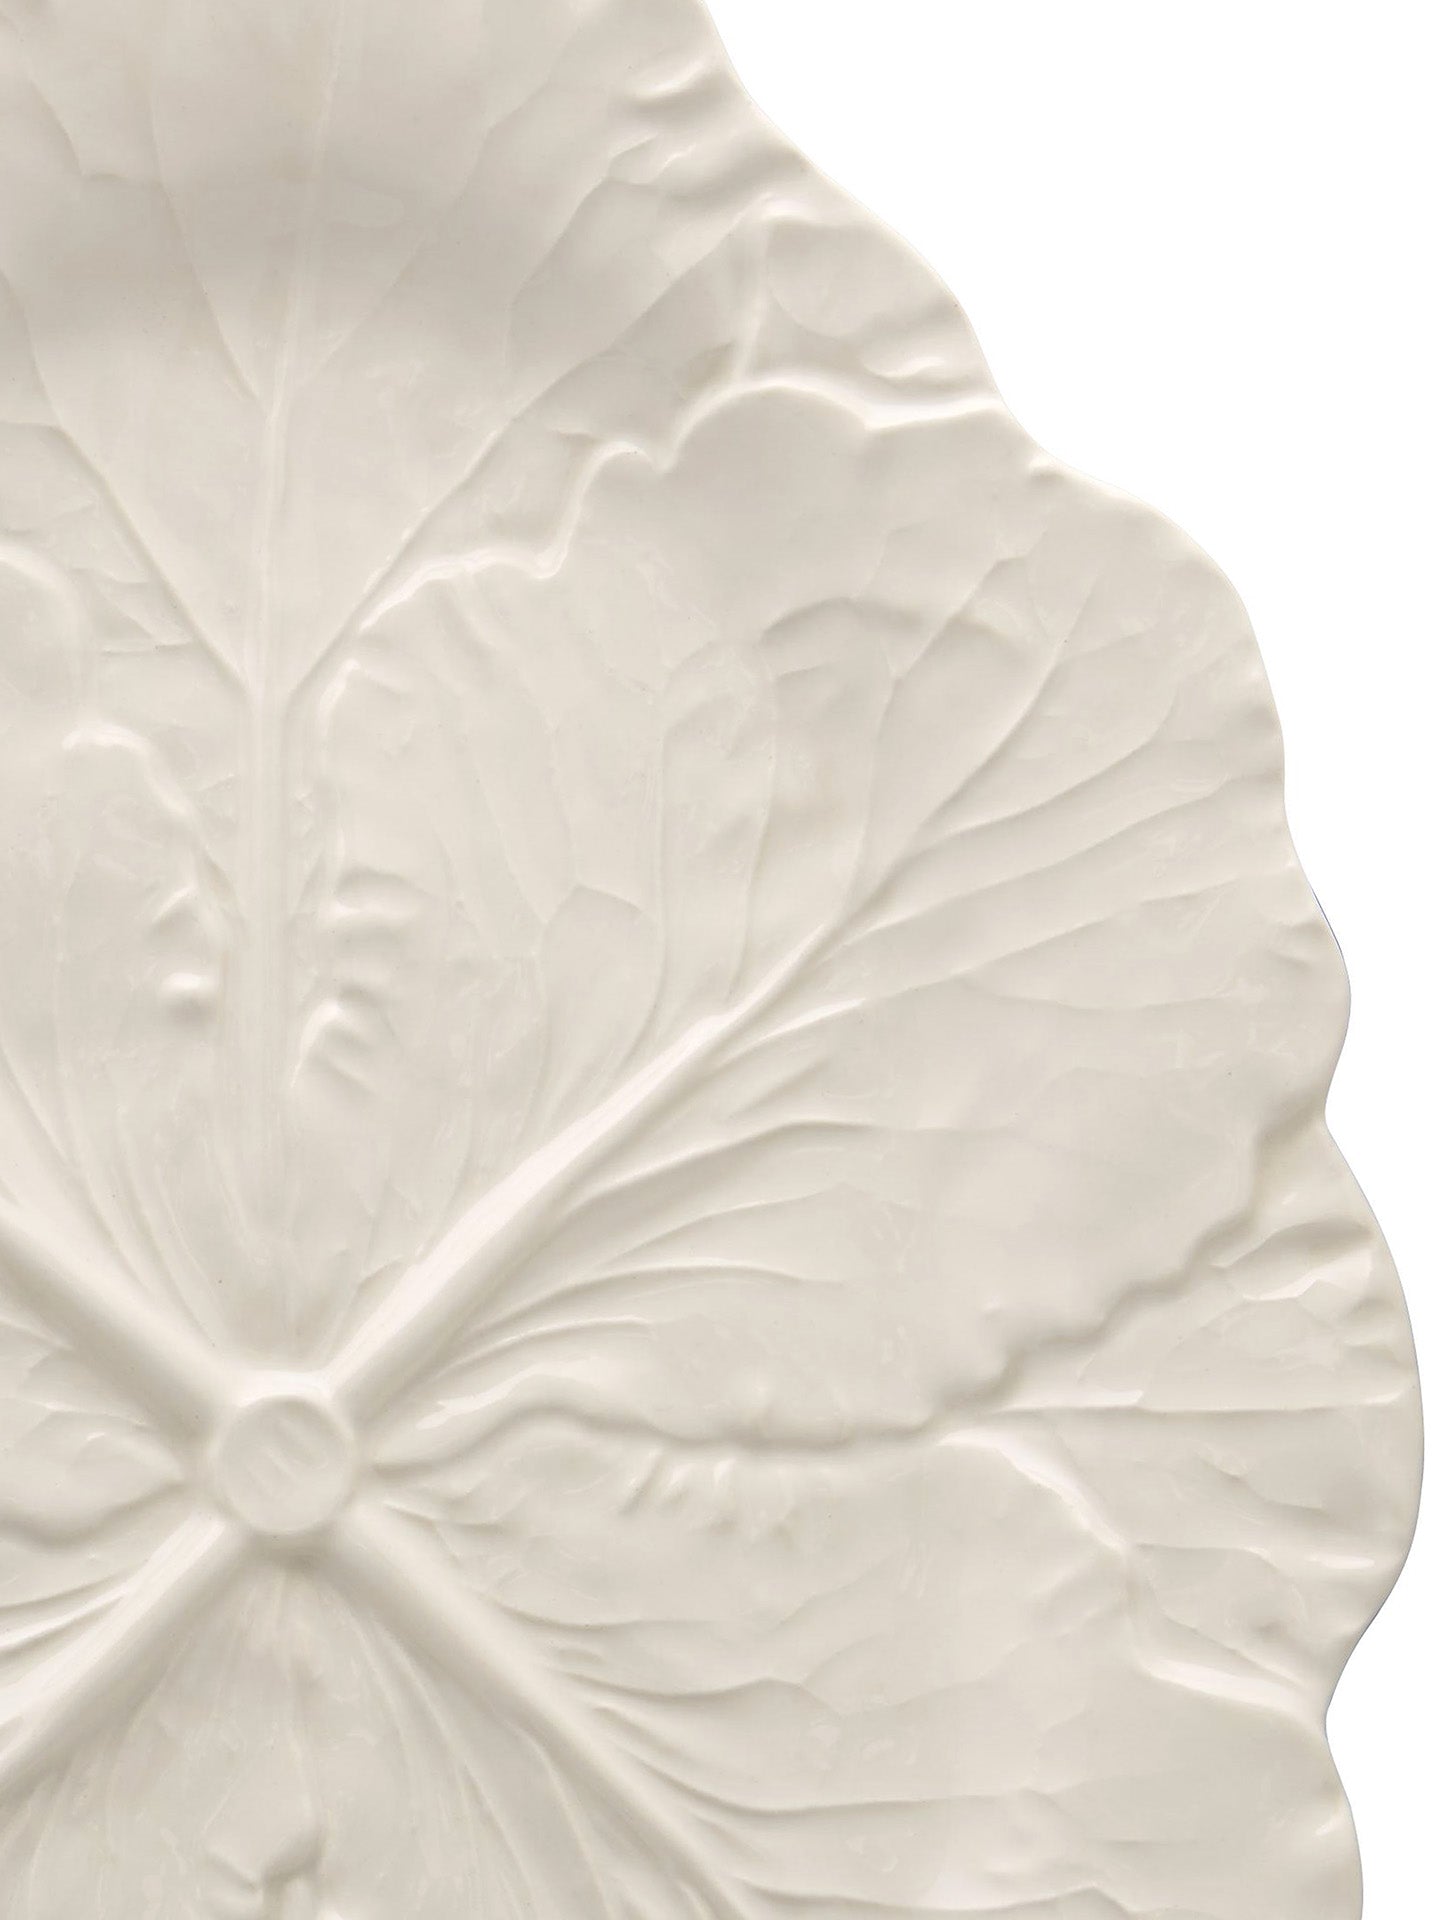 Small Cabbage Oval Platter (37,5 cm), ivory